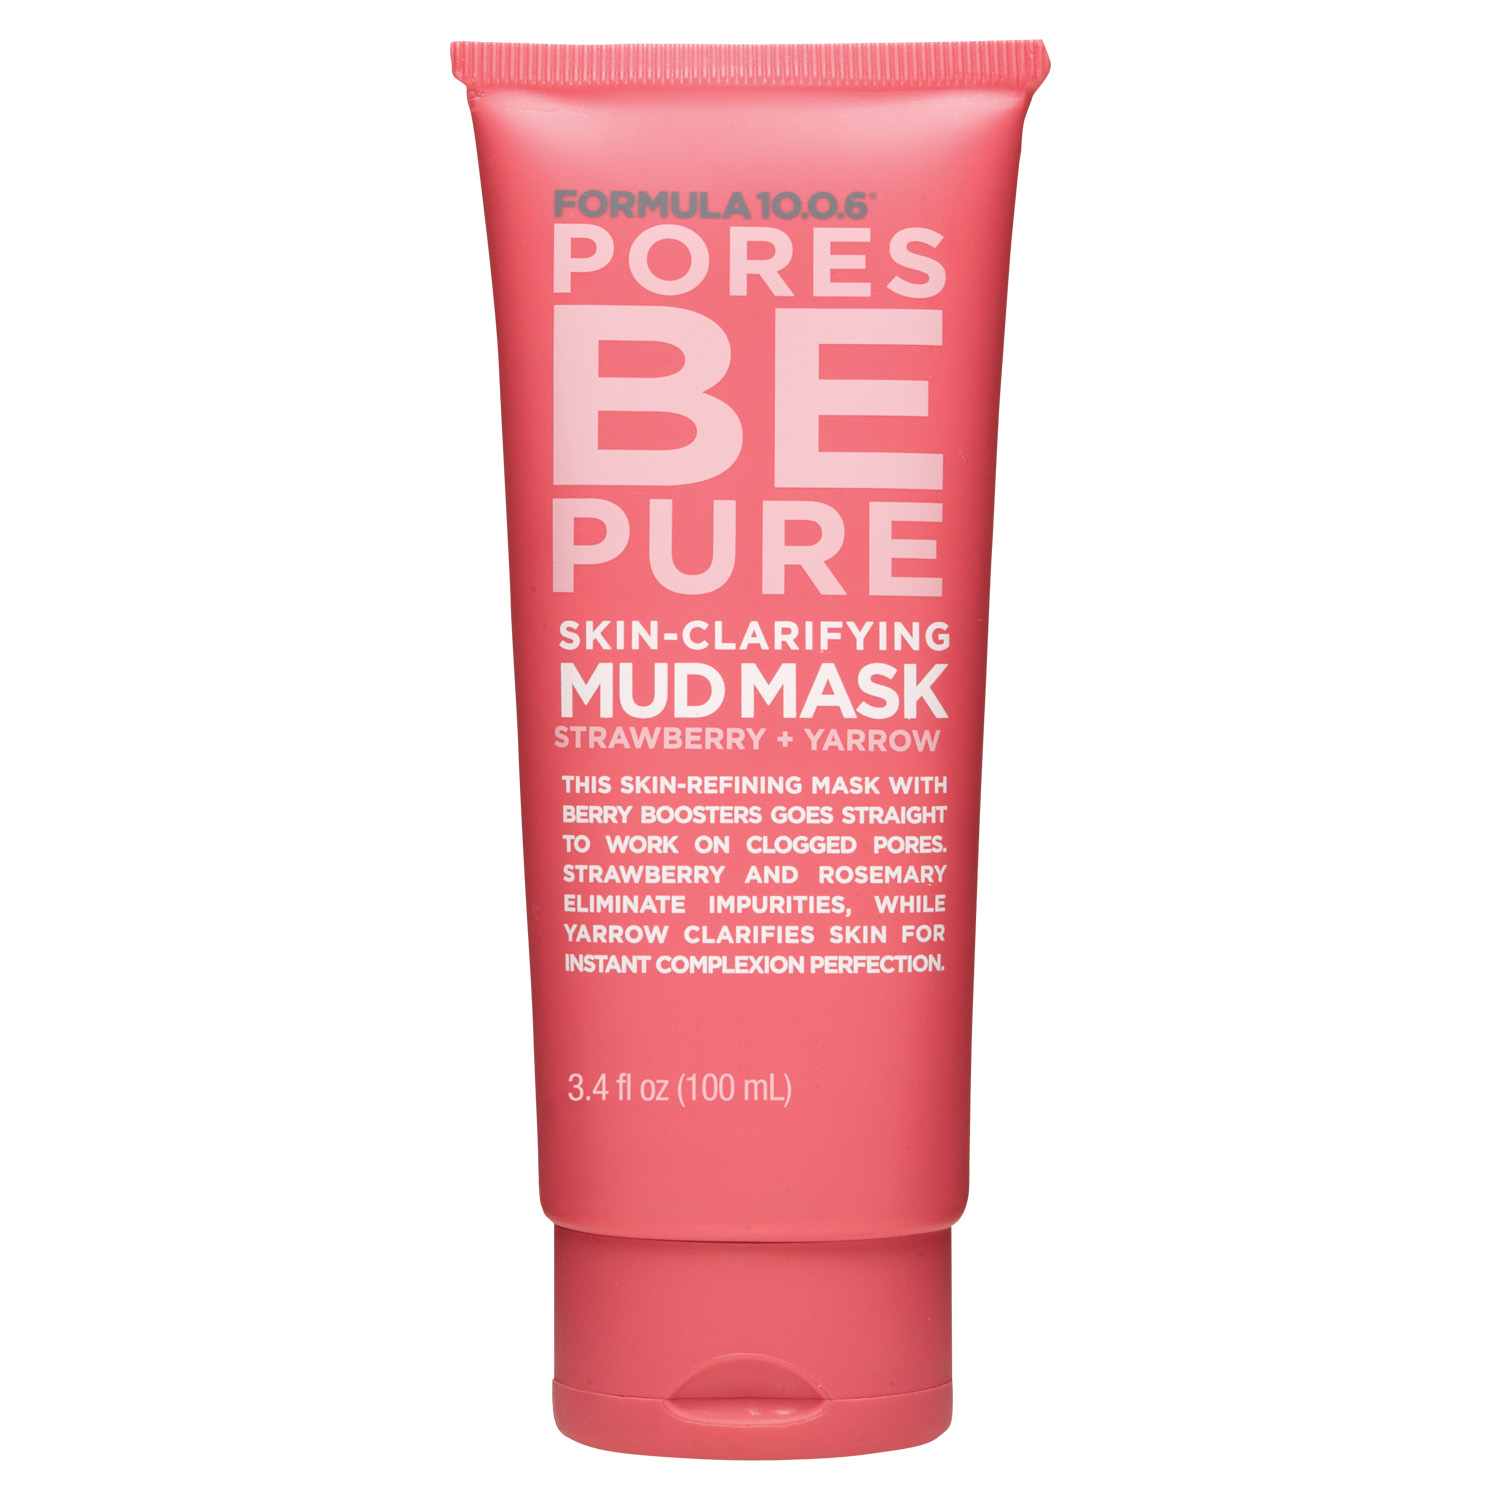 Formula 10.0.6 Pores Be Pure Skin-Clarifying Mud Mask by Aspire Brands